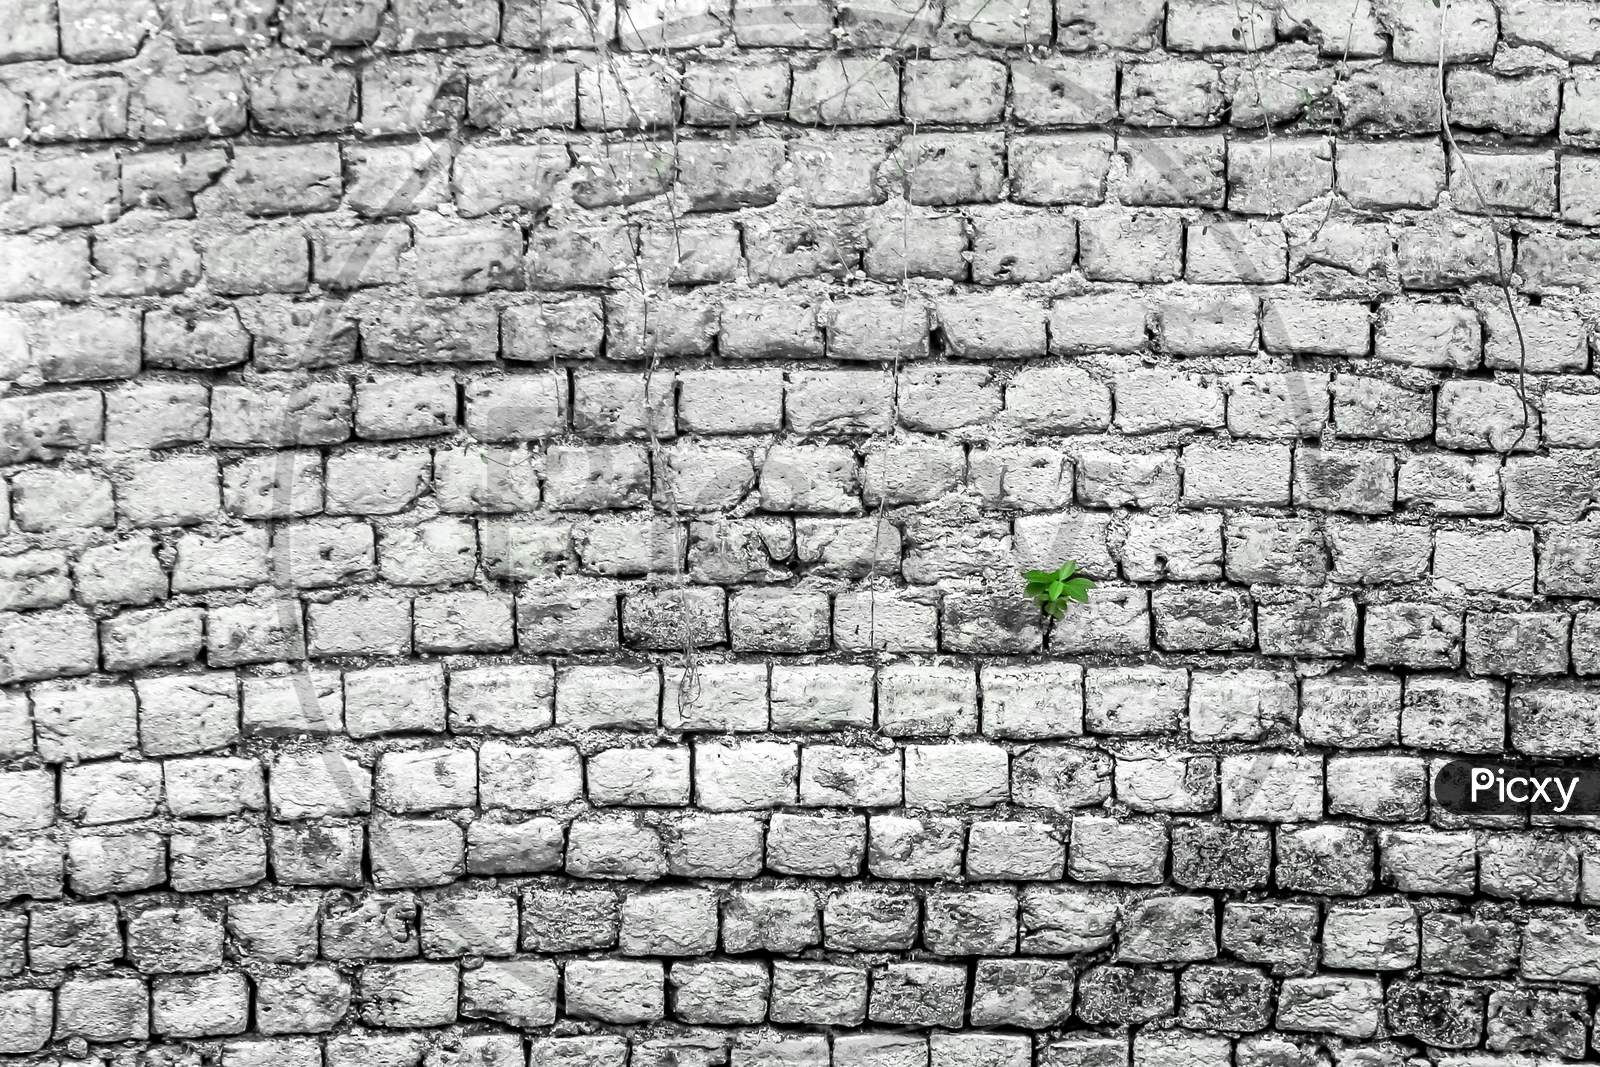 Image Of White Brick Wall With Little Plant Background Of White Brick Wall Pattern Texture Seamless Texture Old Brick Wall Gb Picxy